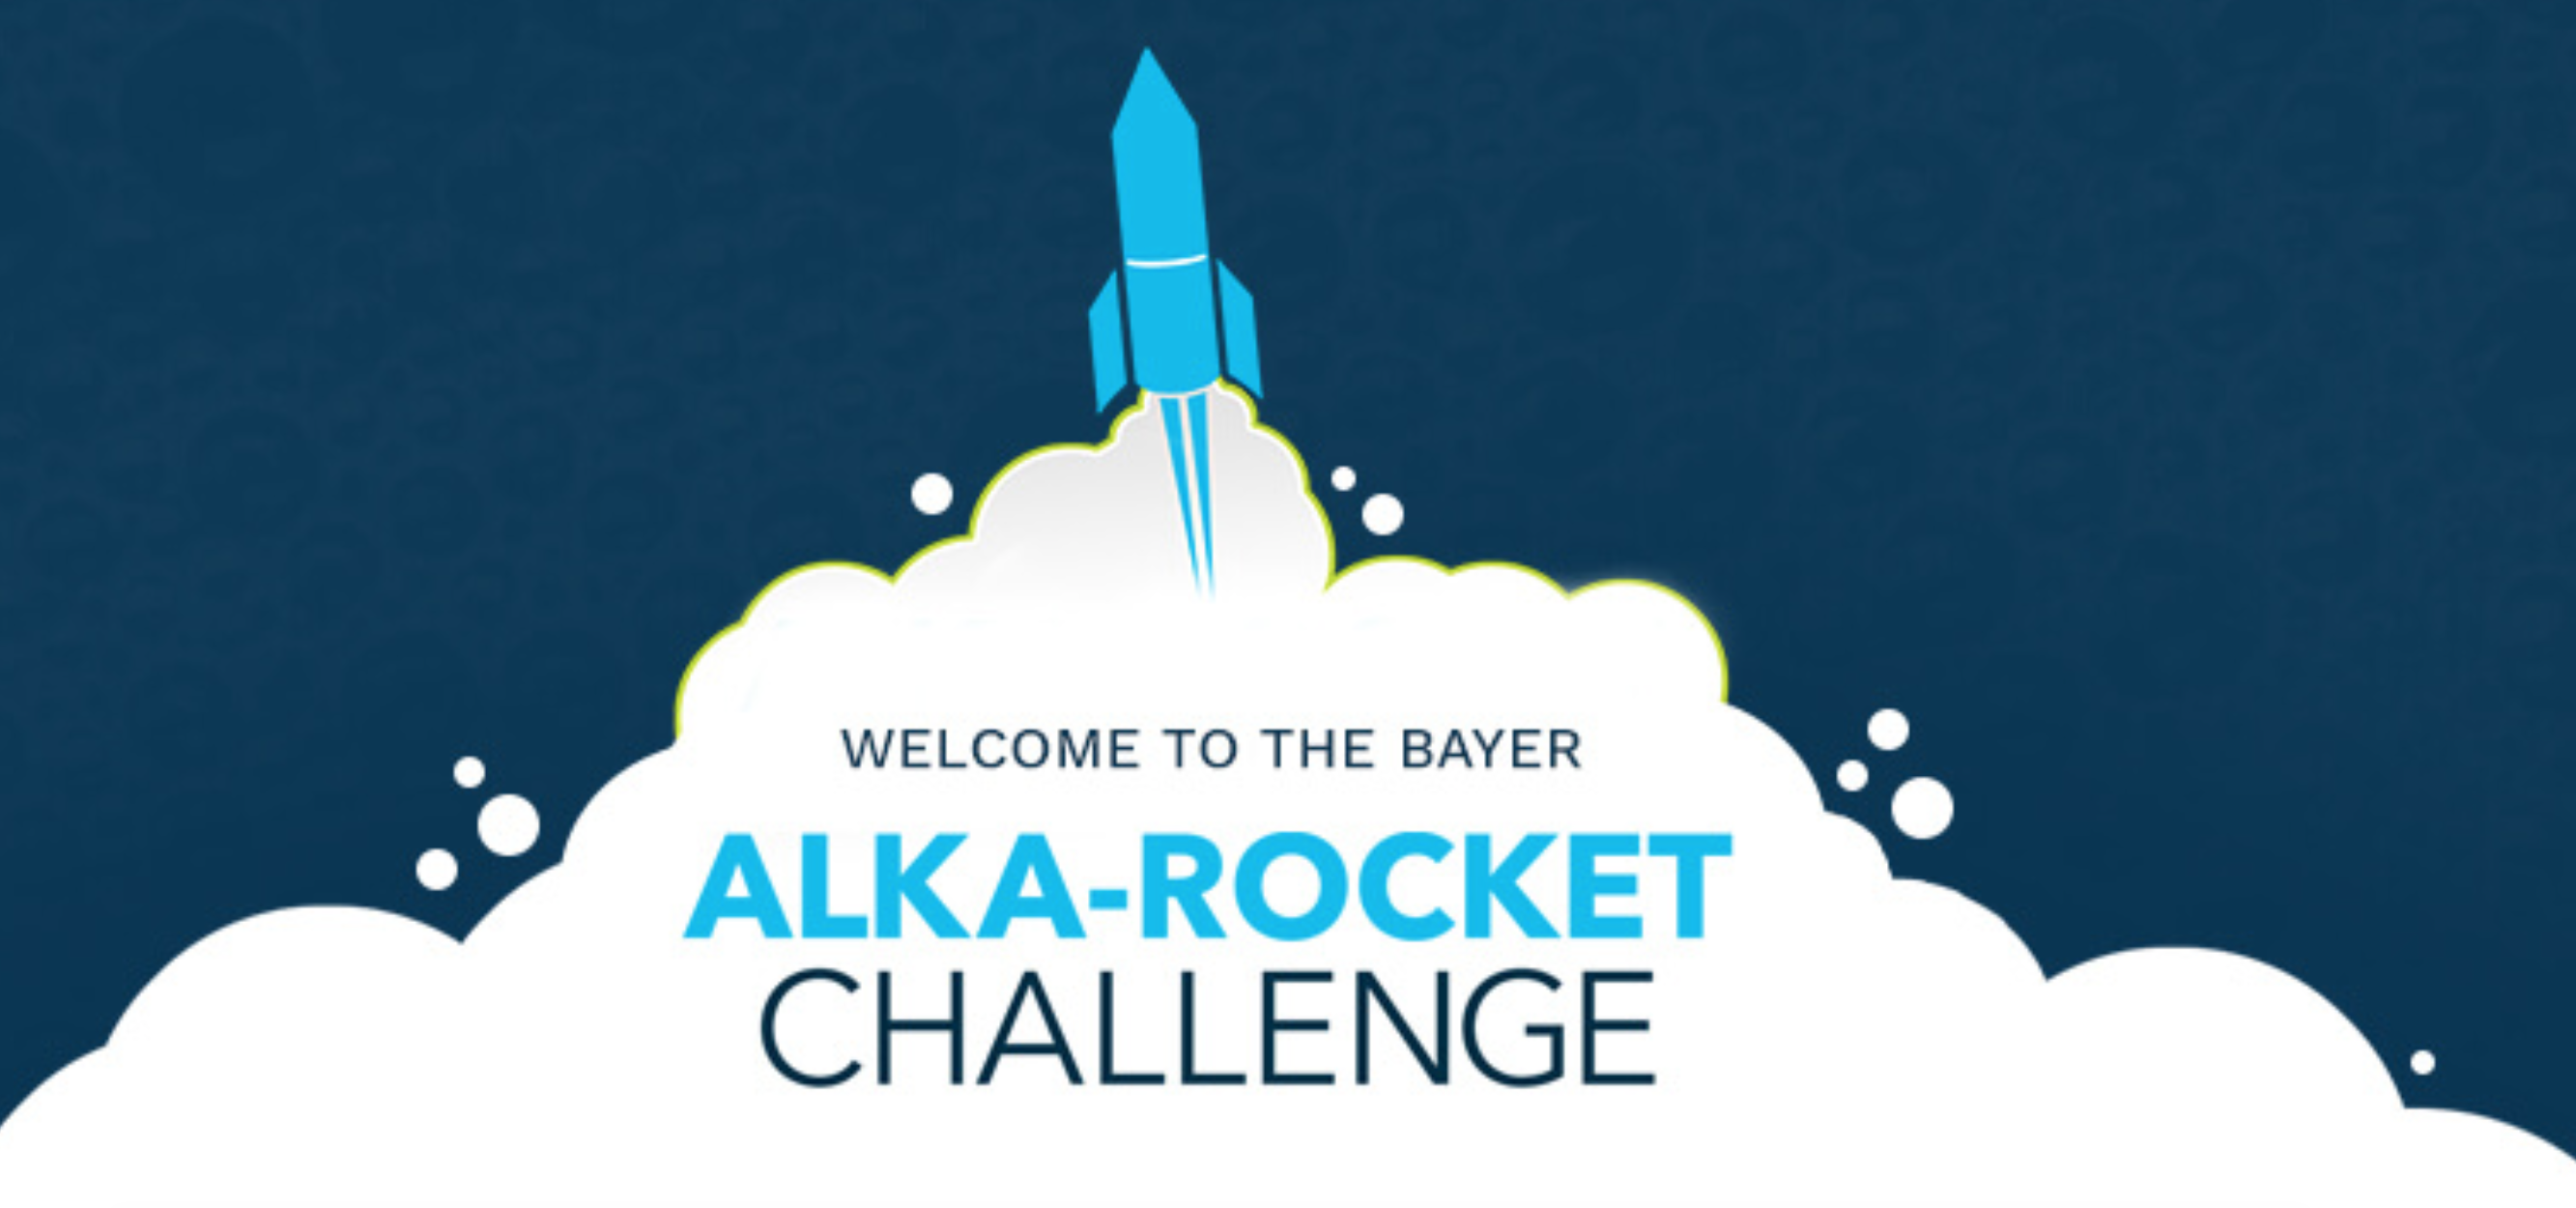 Alka-Rocket Challenge submissions are due Nov. 1.